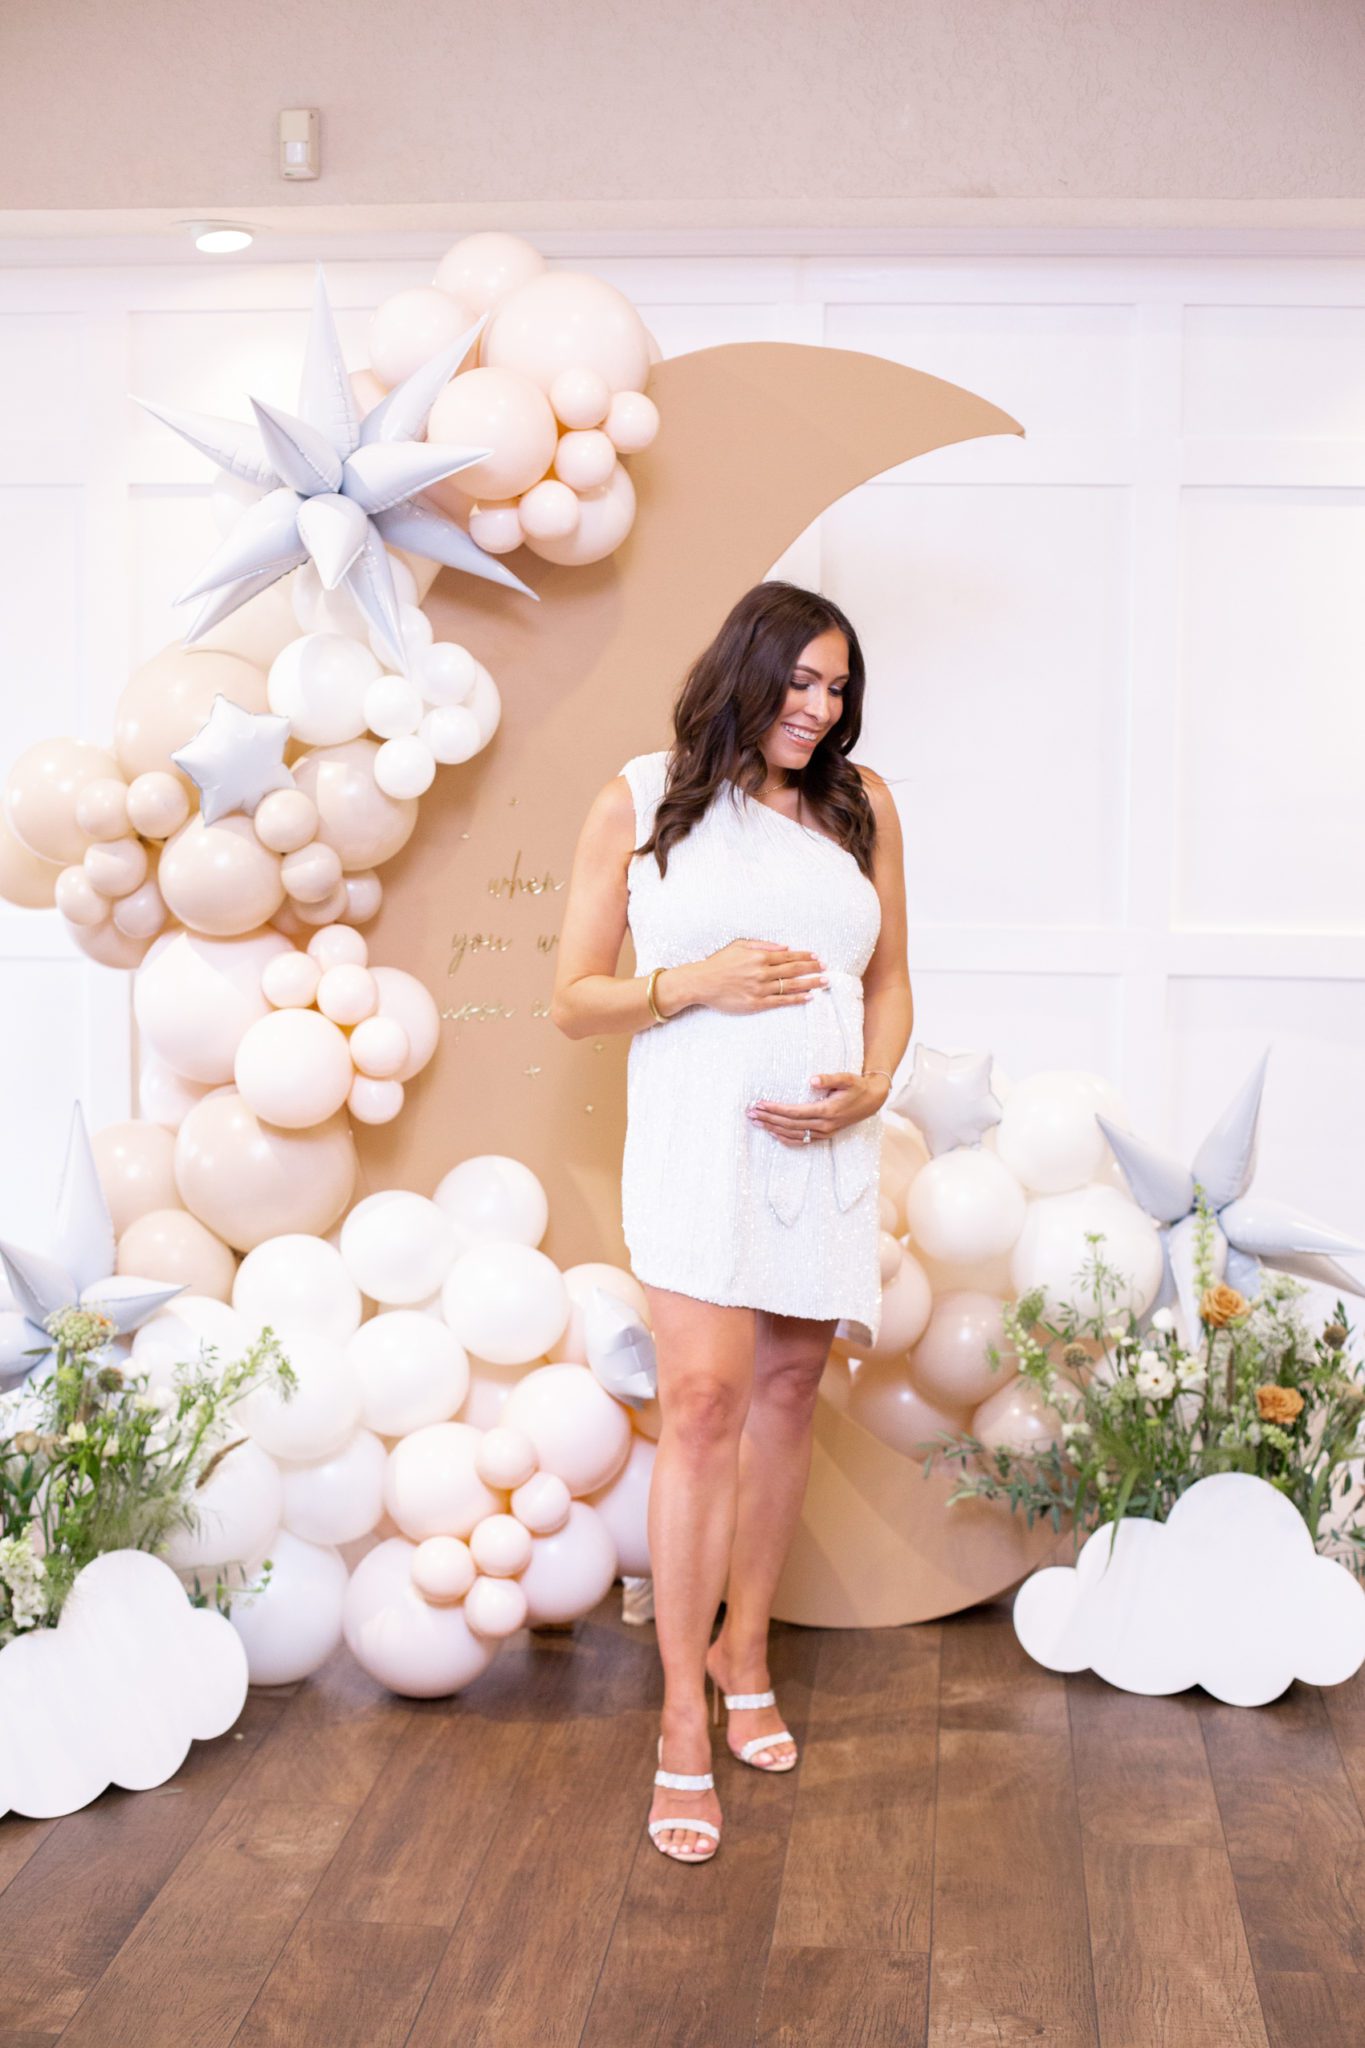 Baby Shower Decor - A Glam Lifestyle